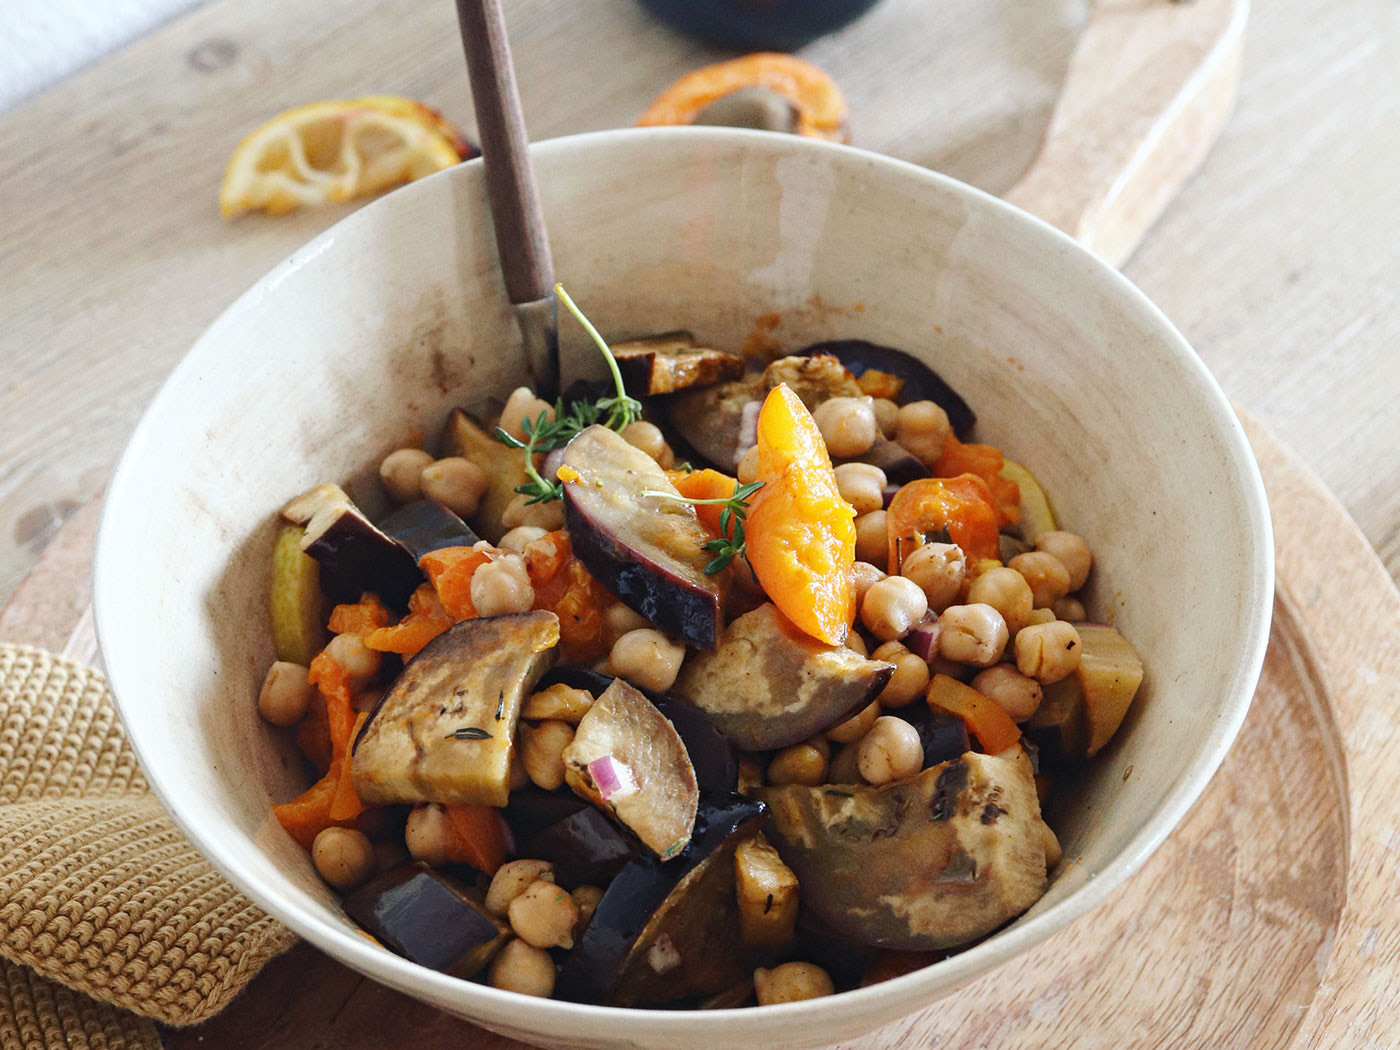 Aubergine-apricot salat with chickpeas